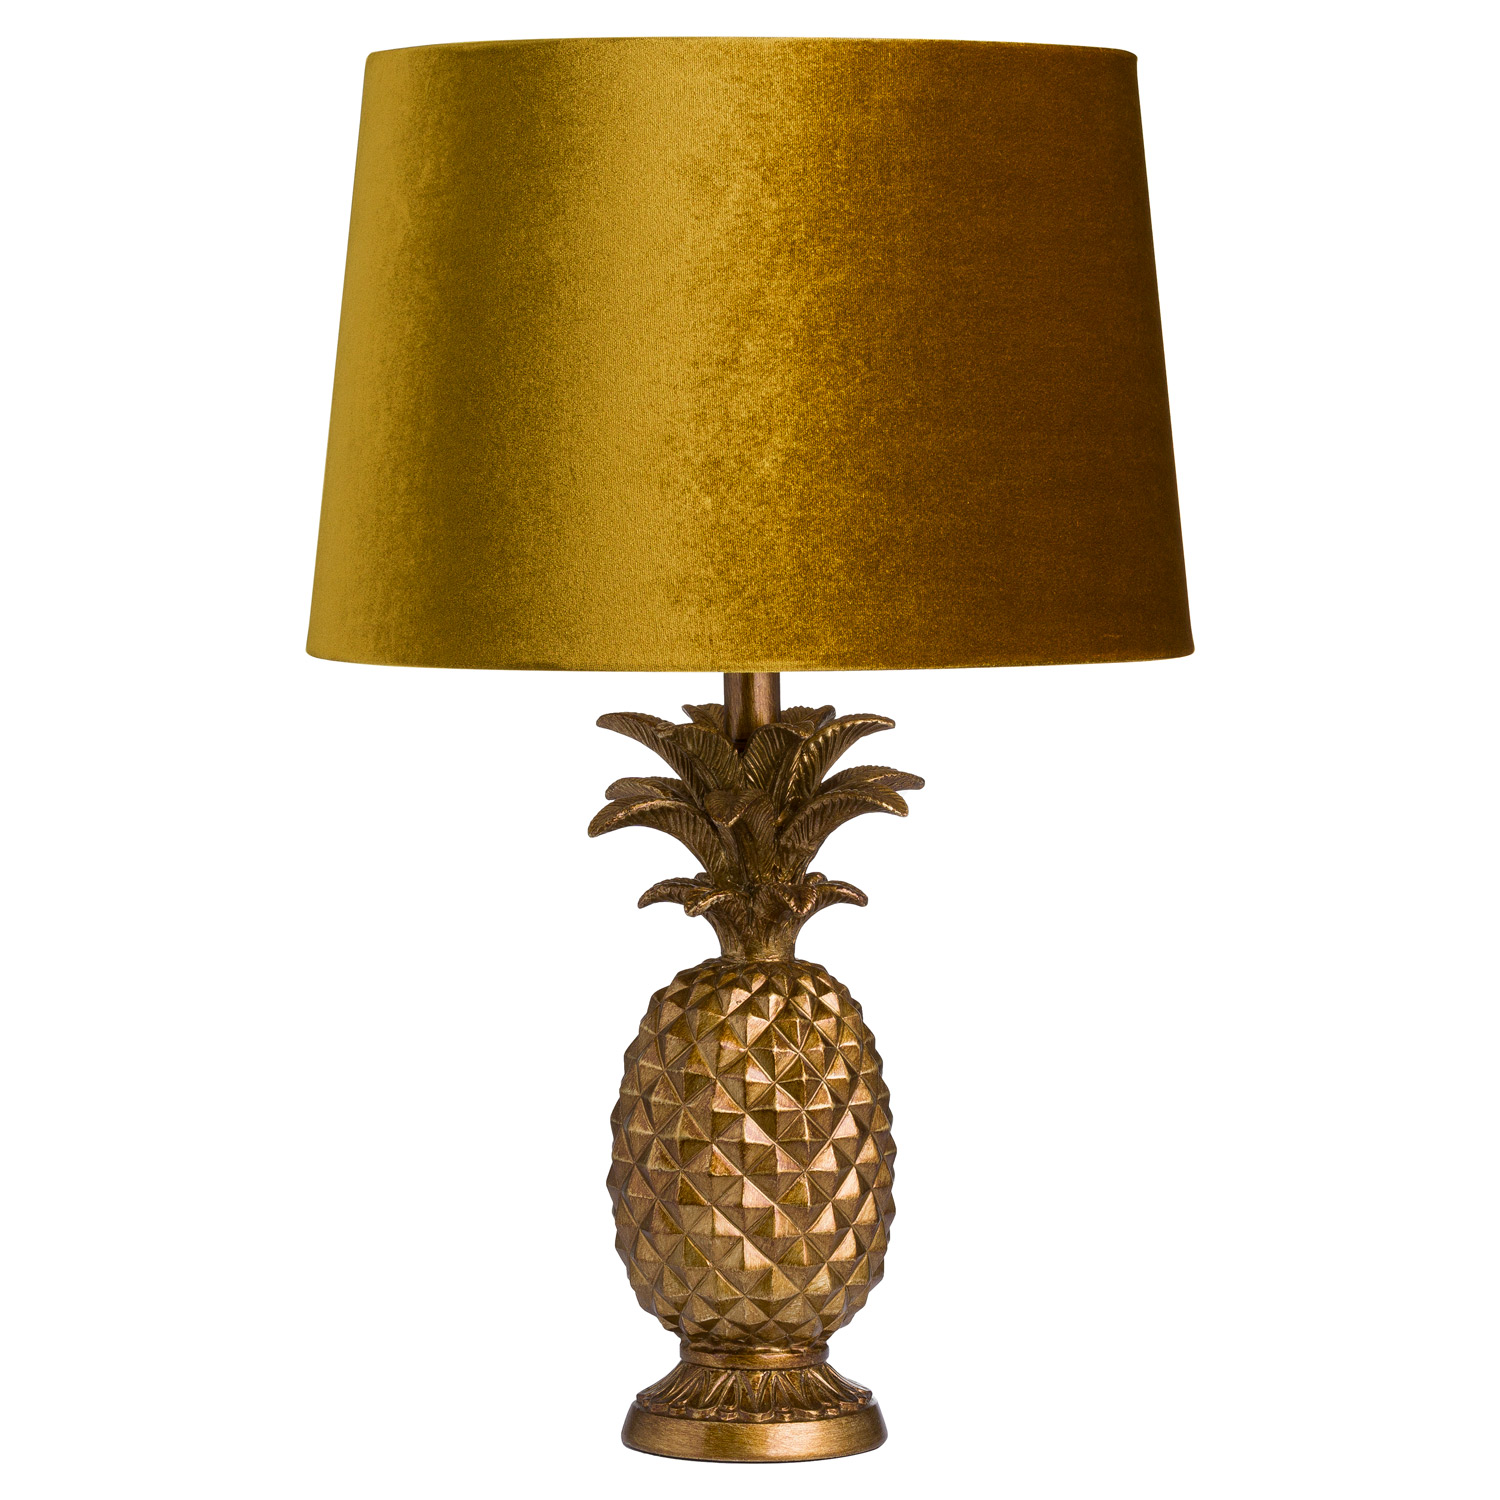 Antique Gold Pineapple Lamp With Mustard Velvet Shade - Image 1